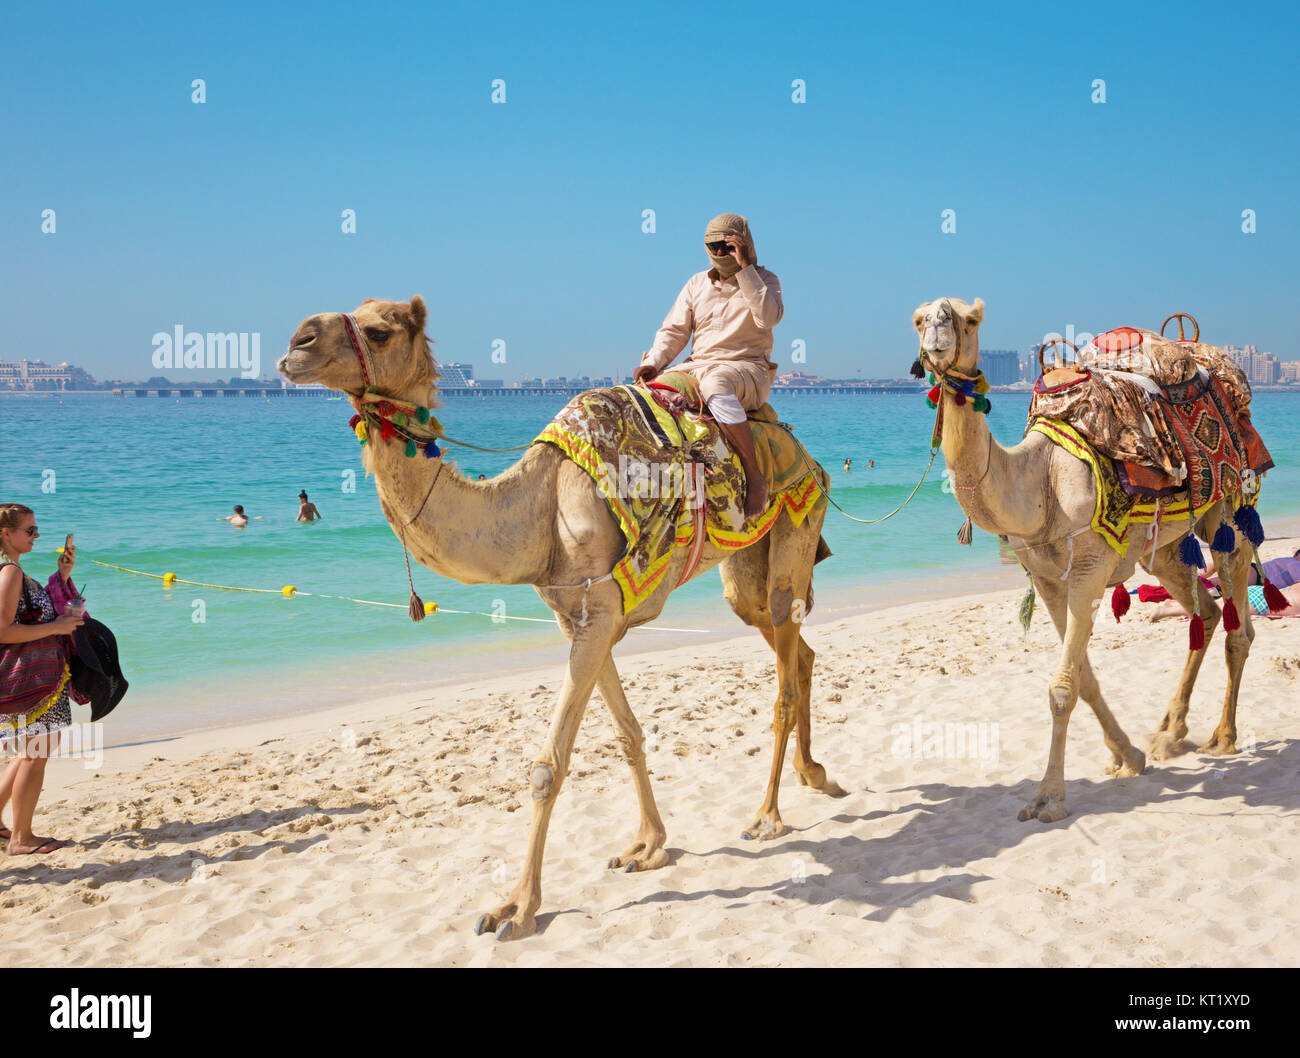 DUBAI, UAE - MARCH 28, 2017: The camels on the beach. Stock Photo